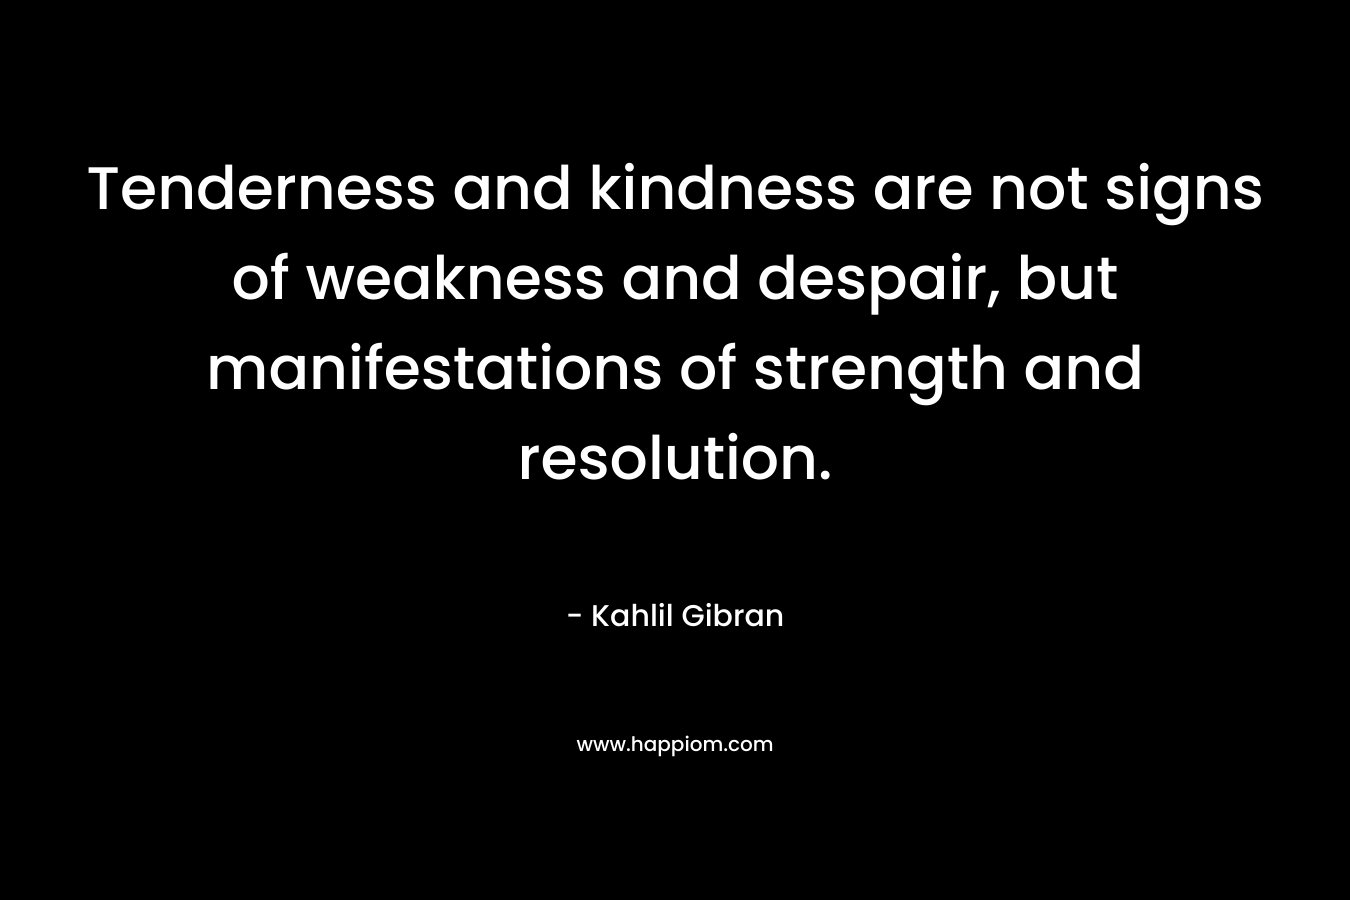 Tenderness and kindness are not signs of weakness and despair, but manifestations of strength and resolution. – Kahlil Gibran